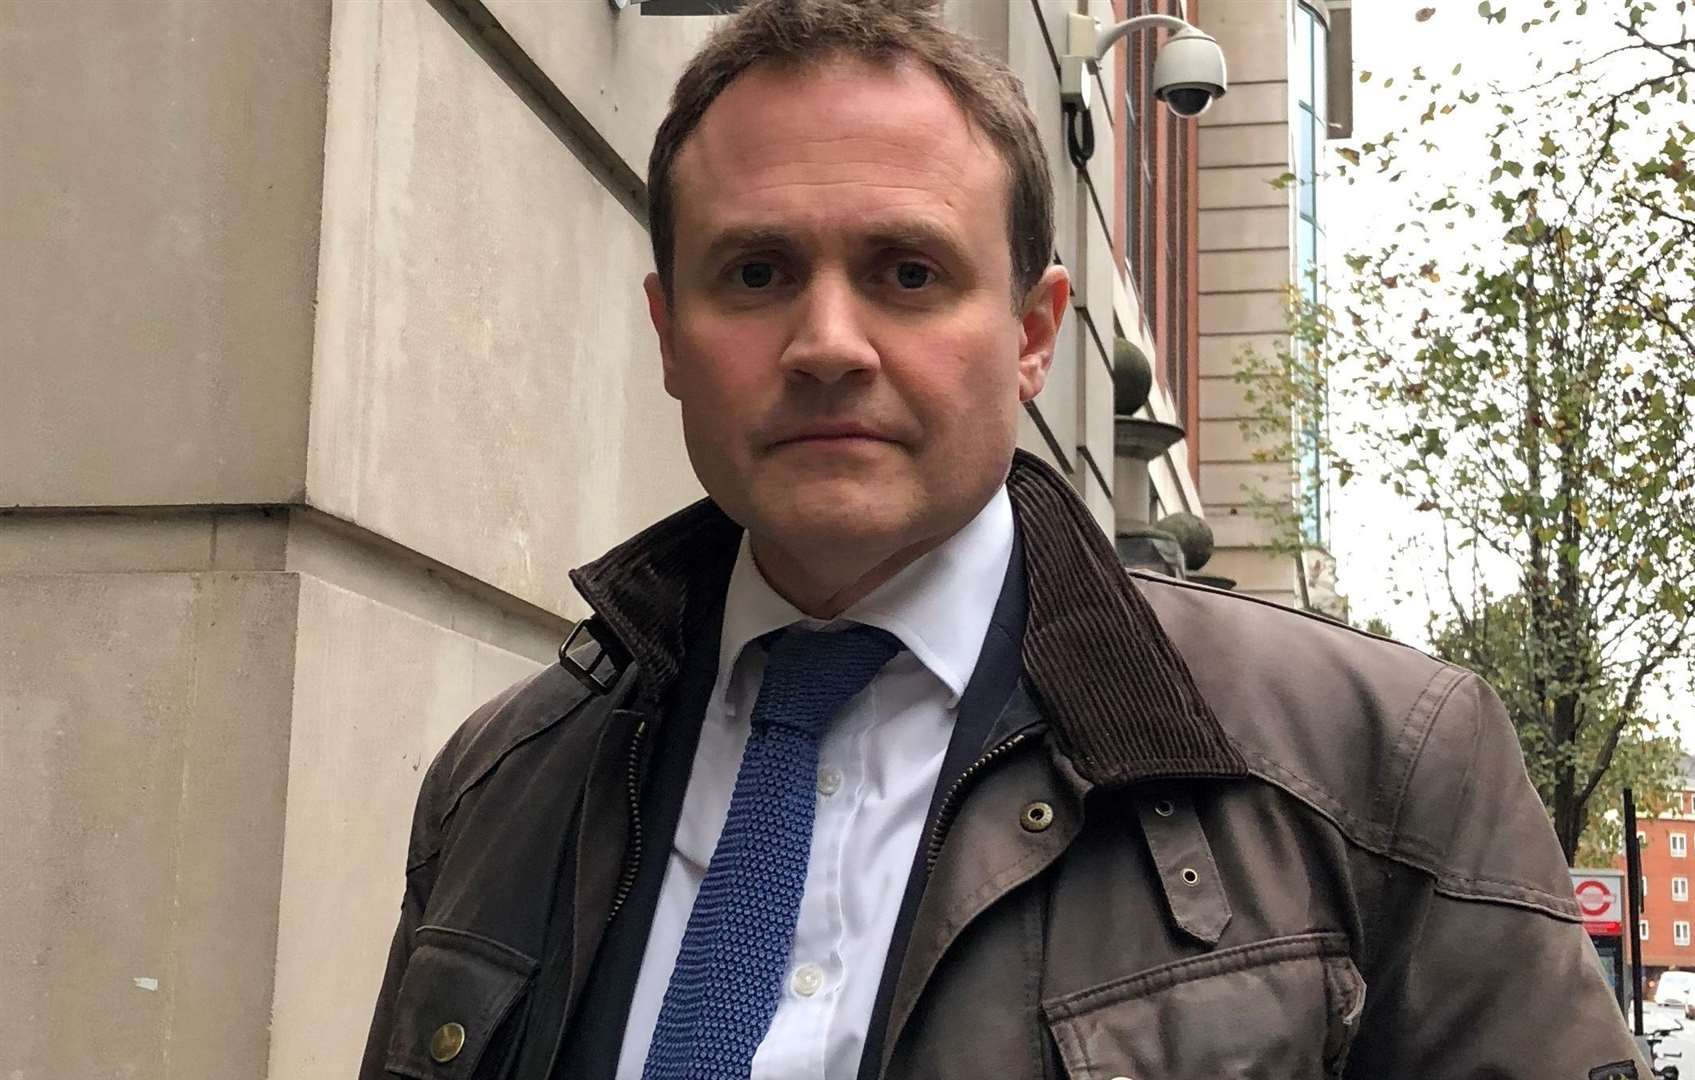 Tonbridge and Malling MP Tom Tugendhat will appear at the event in Tunbridge Wells